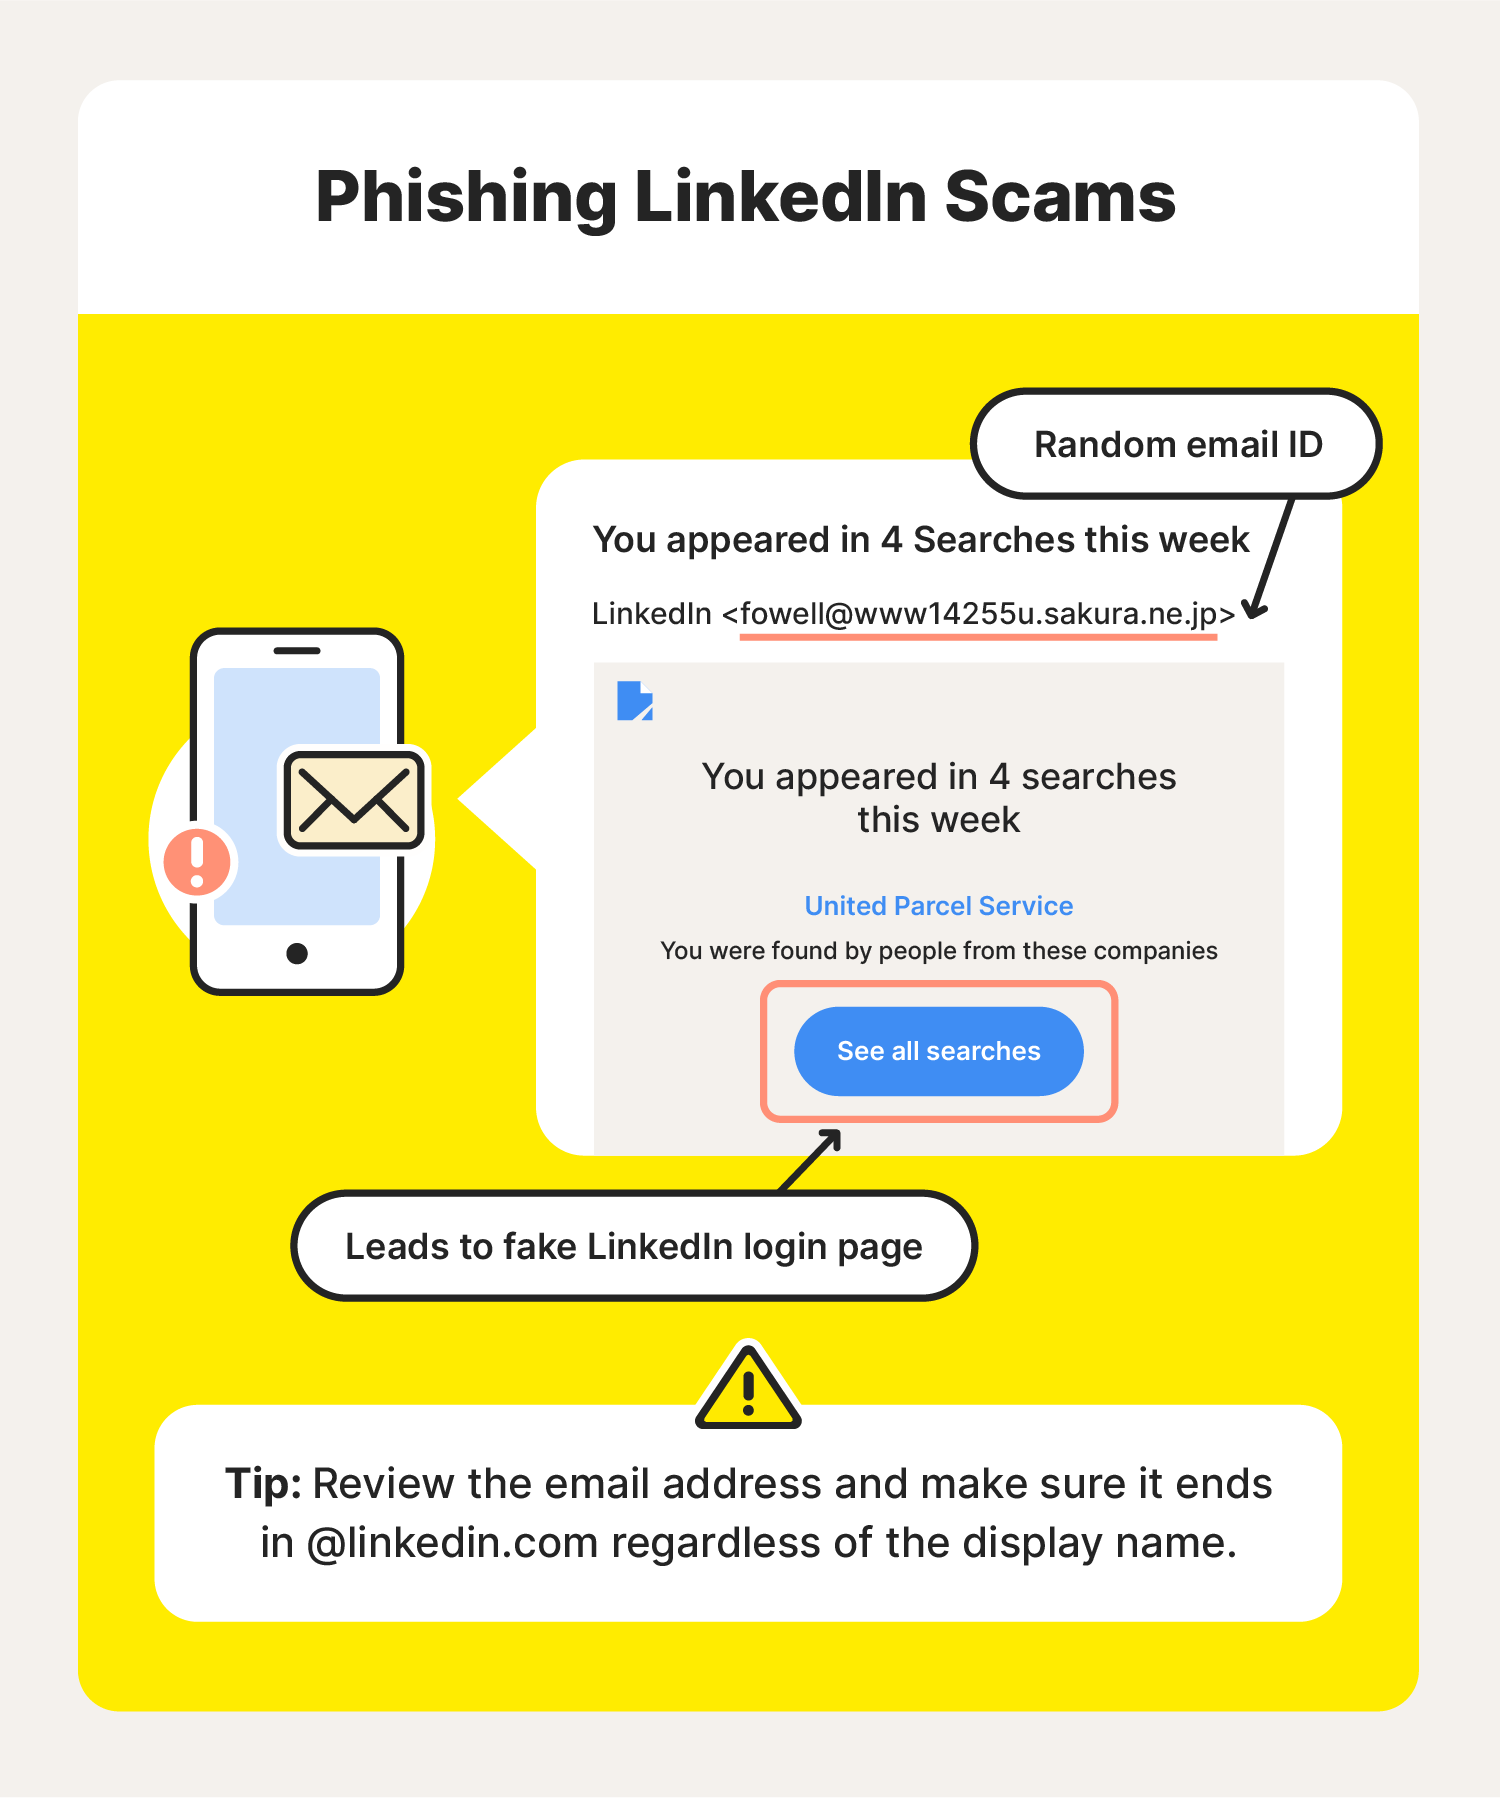 A graphic shows a potential phishing LinkedIn scam